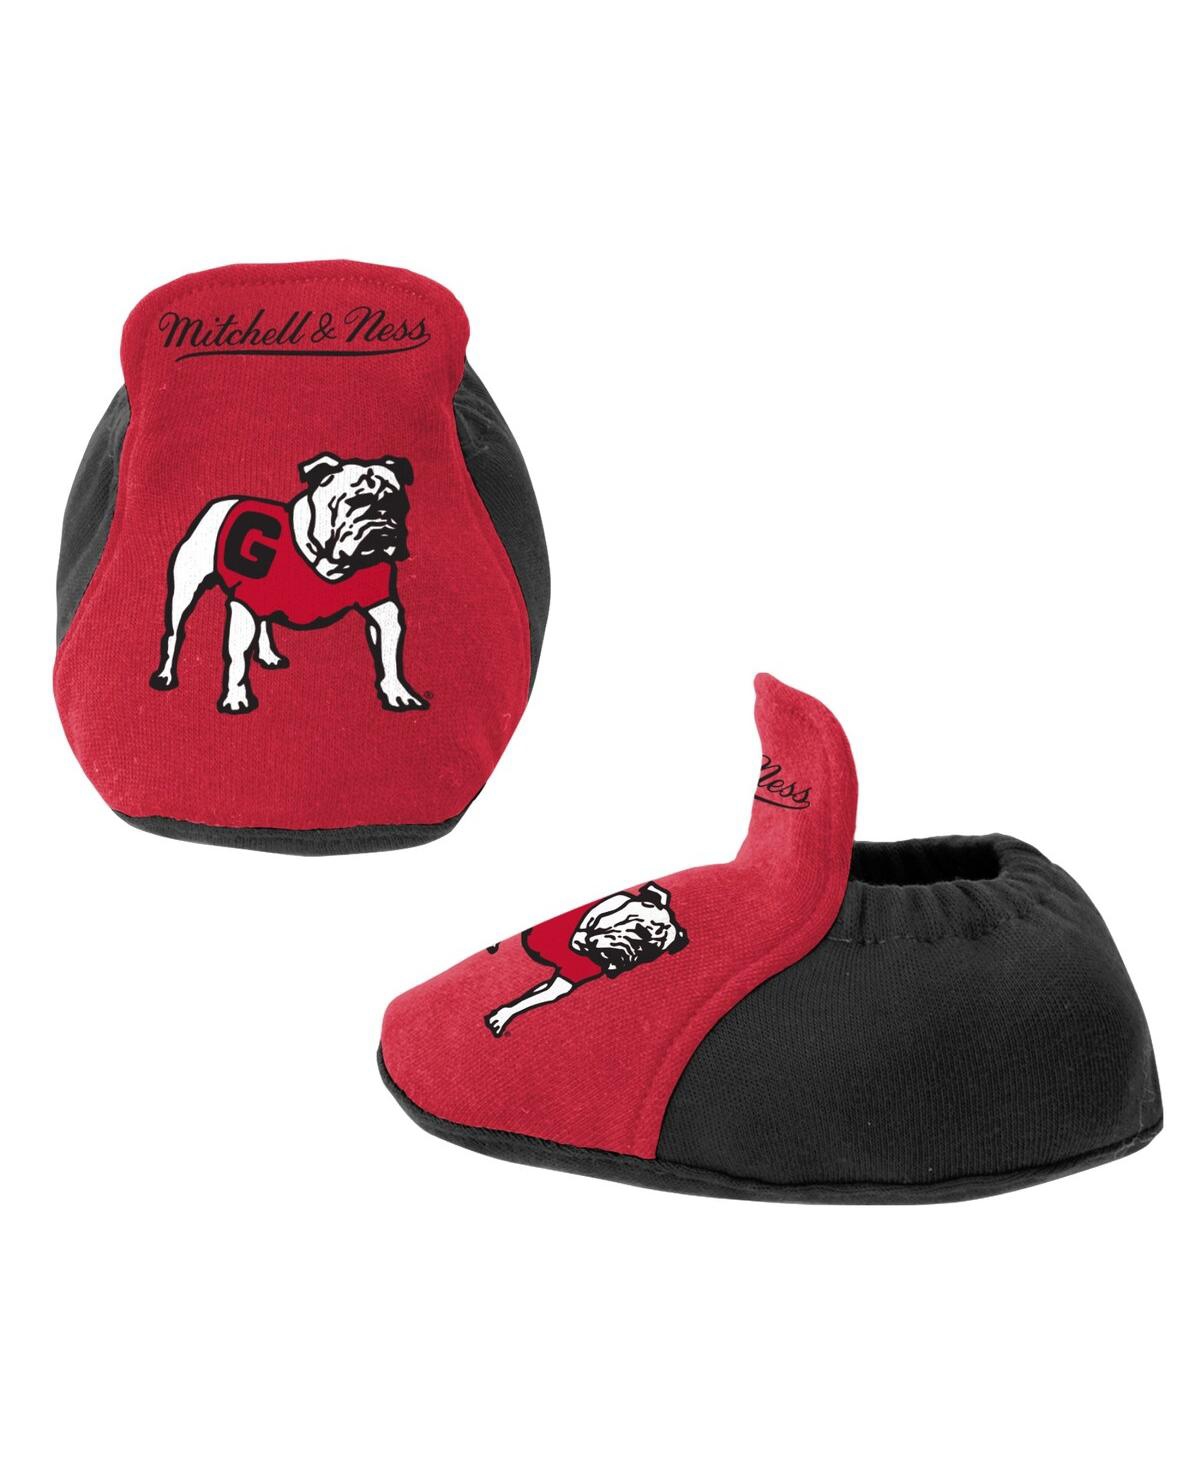 Shop Mitchell & Ness Baby Boys And Girls  Black, Red Georgia Bulldogs 3-pack Bodysuit, Bib And Bootie Set In Black,red